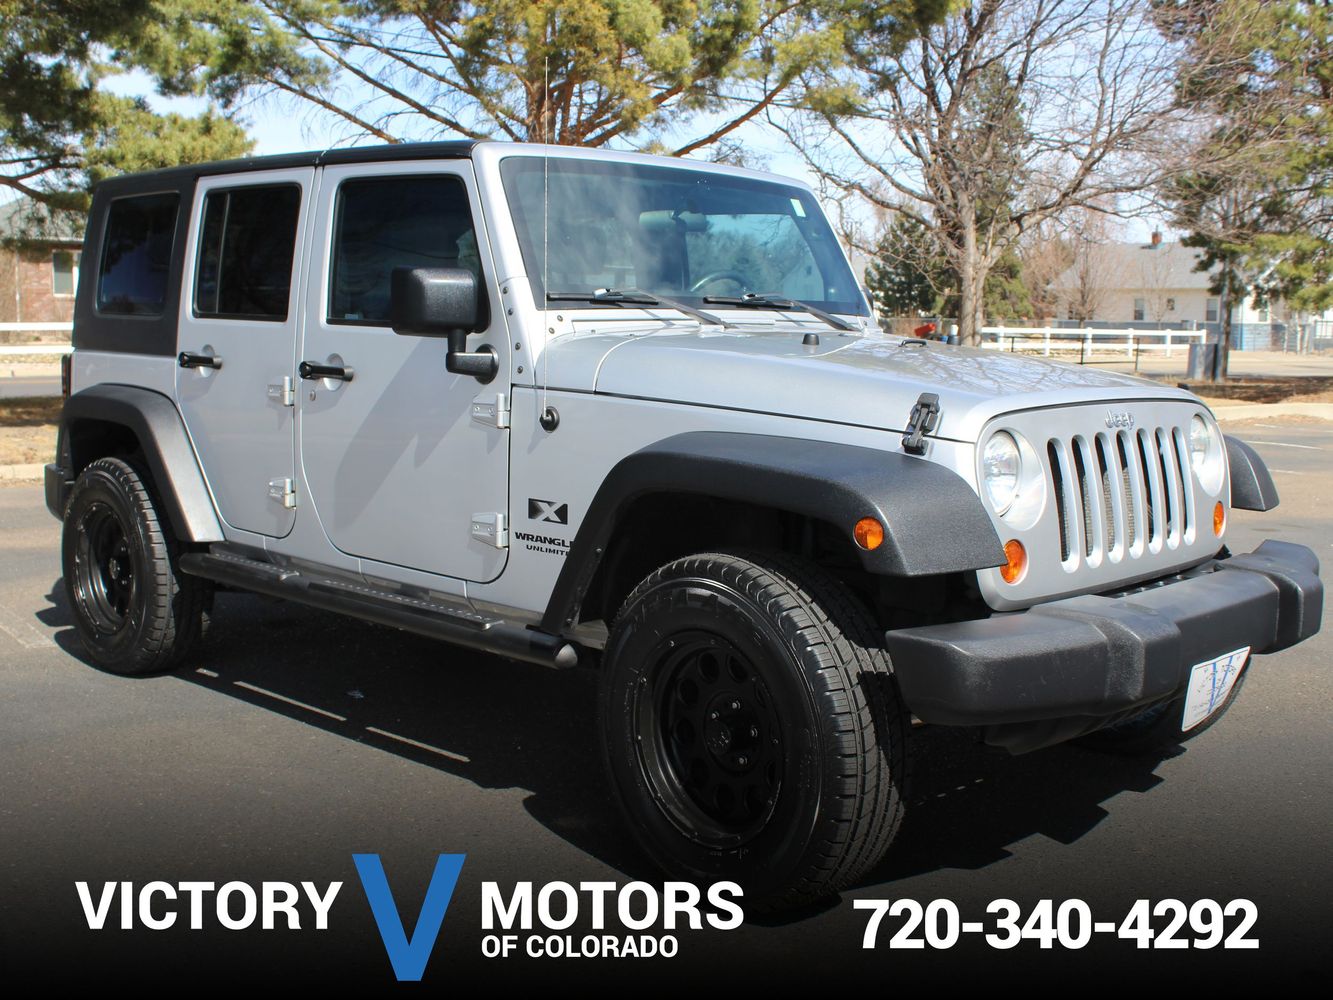 2007 Jeep Wrangler Unlimited Unlimited X | Victory Motors of Colorado